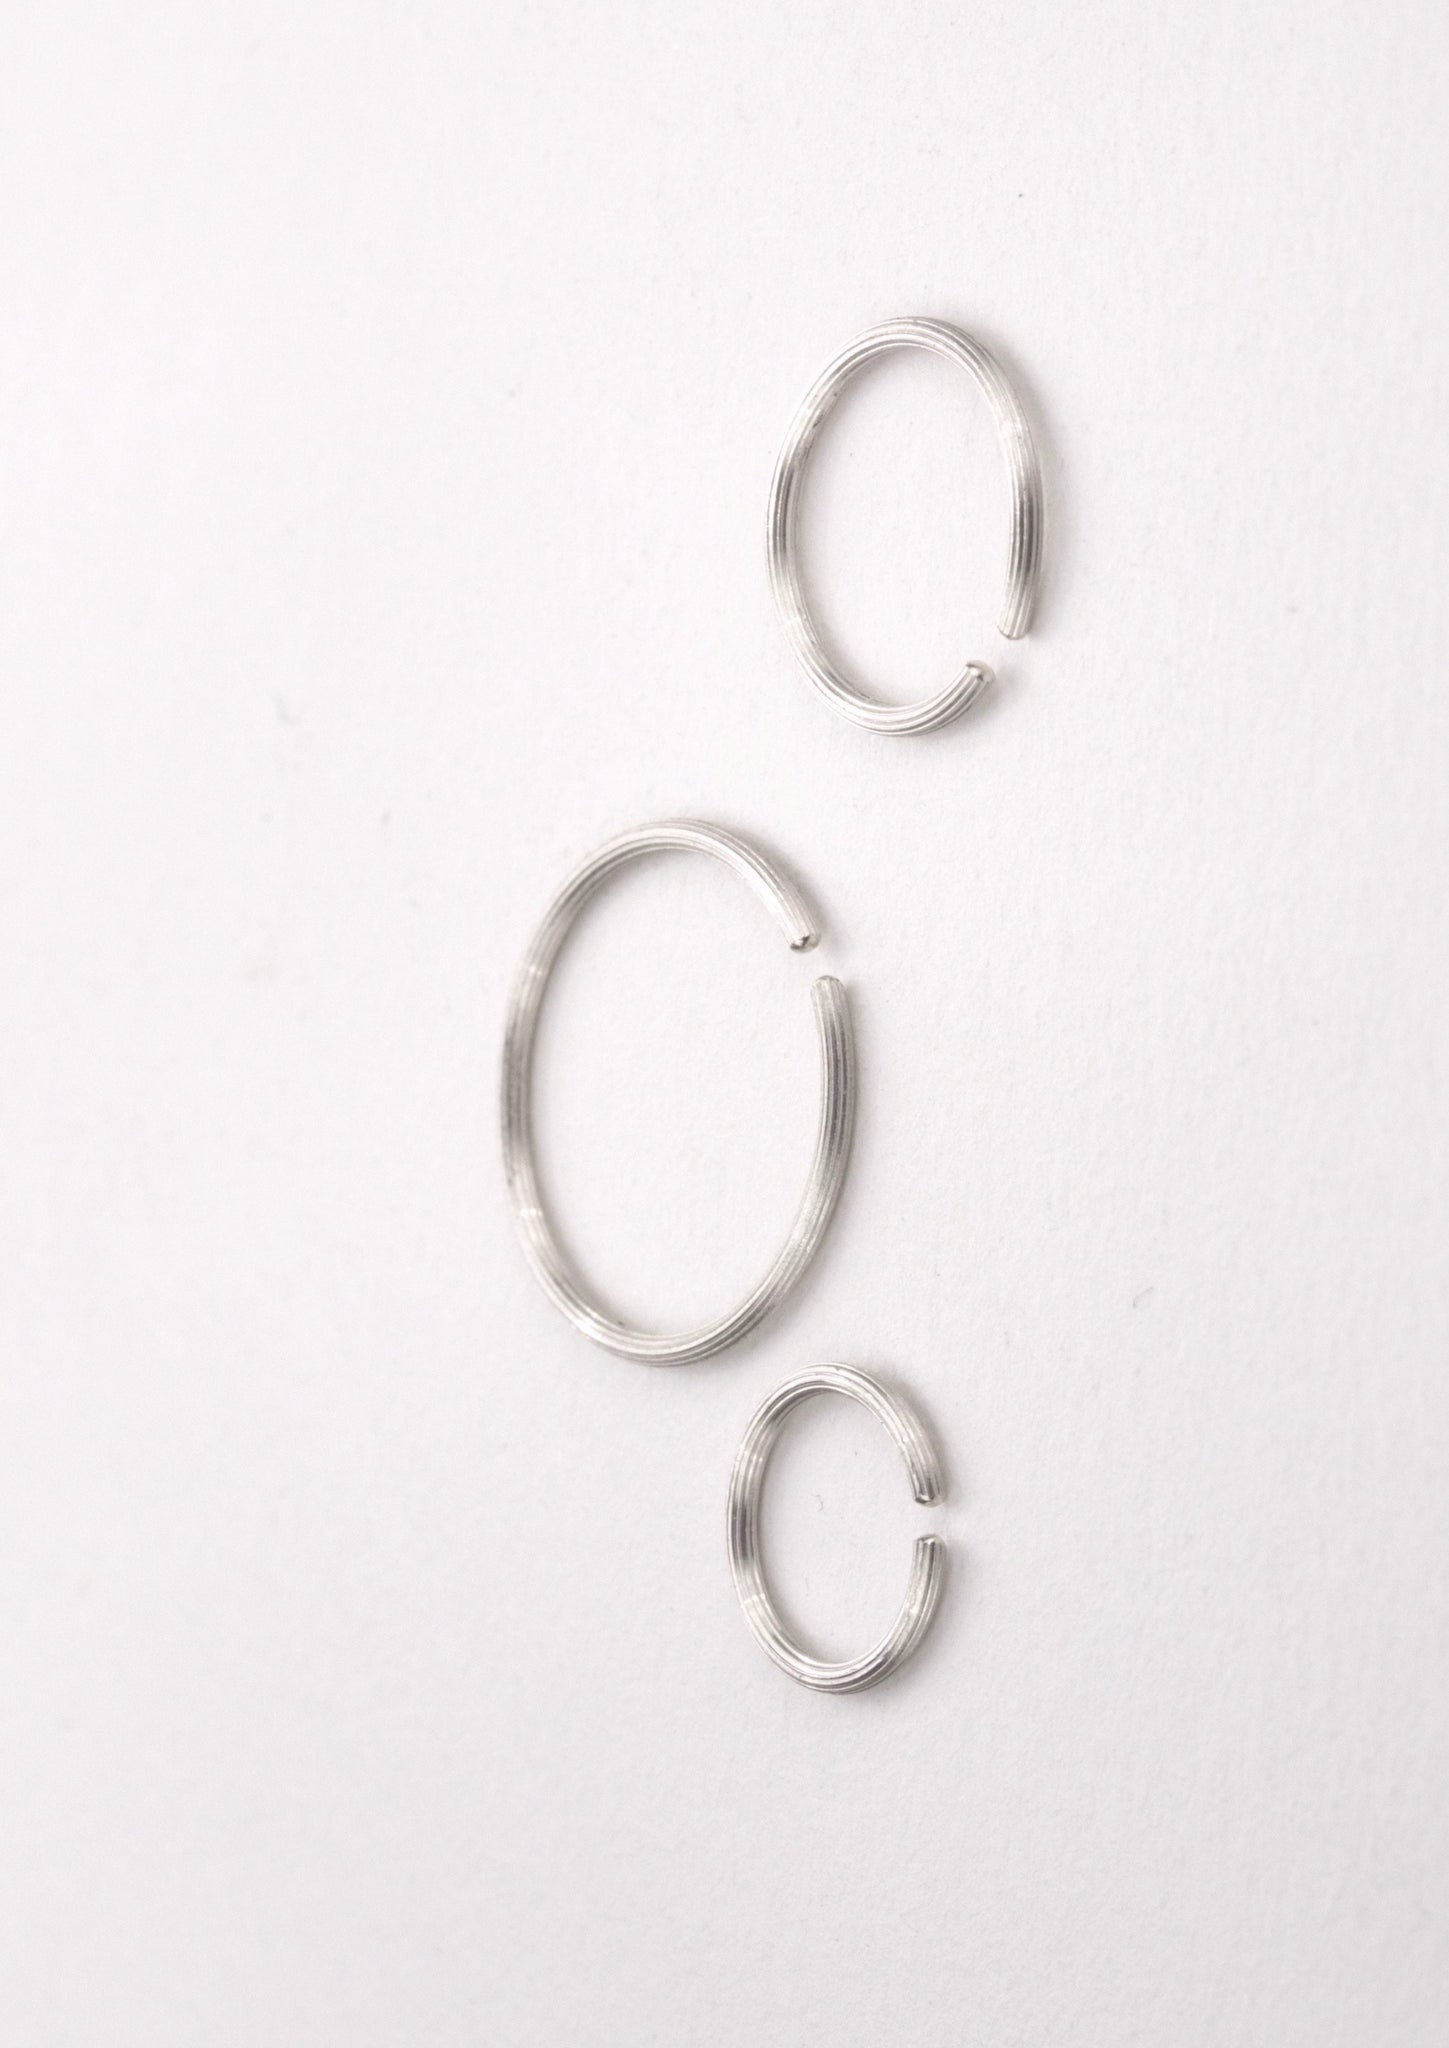 'BASIC NEEDS' Hoops, Fairtrade sterling silver